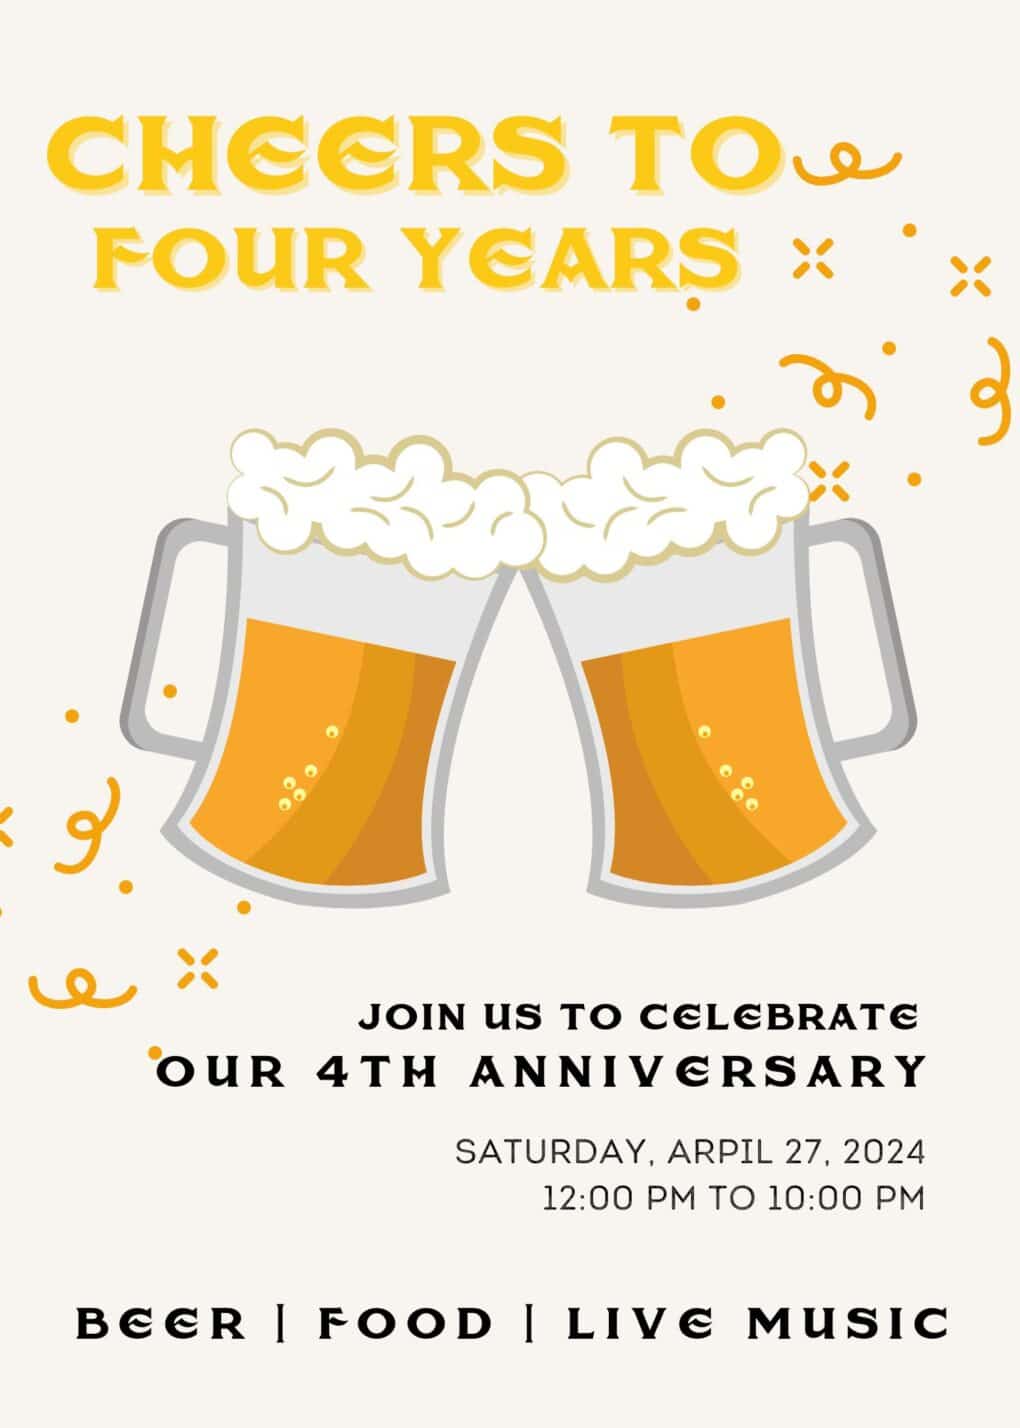 Hemauer Brewing Co. is celebrating their 4th birthday party on April 27, 2024.